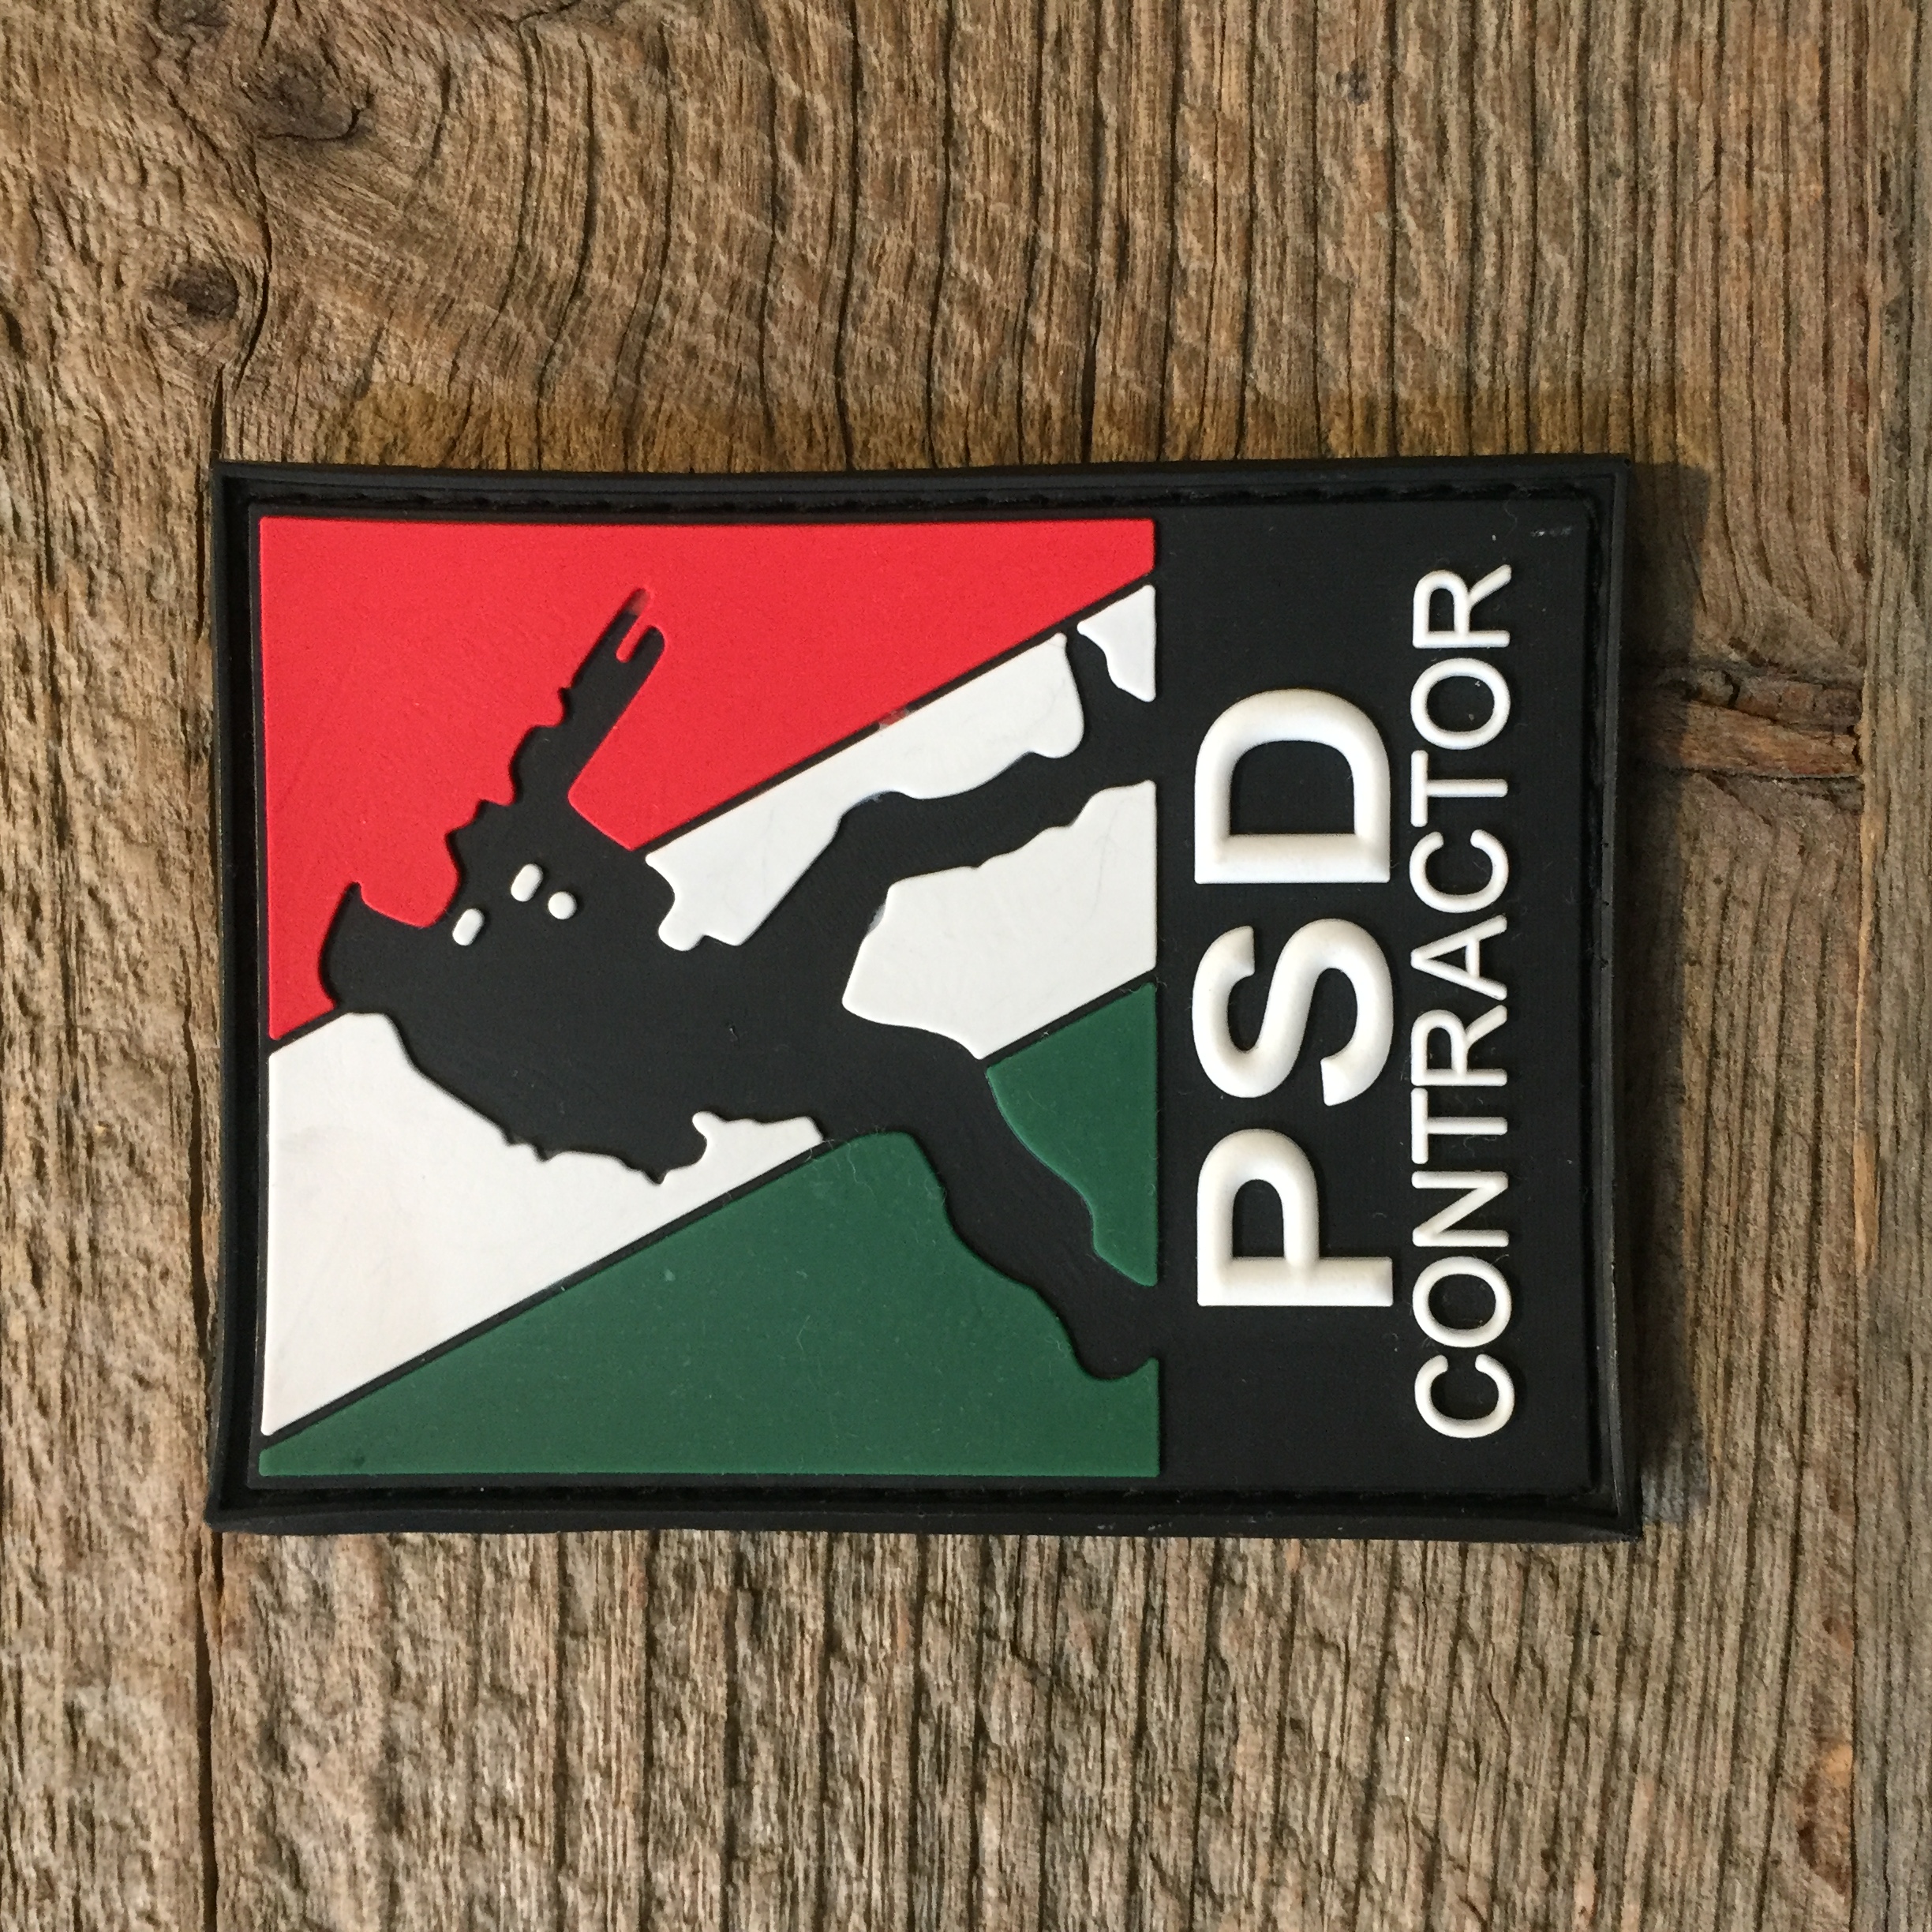 Patch PSD contractor realizzata in pvc.